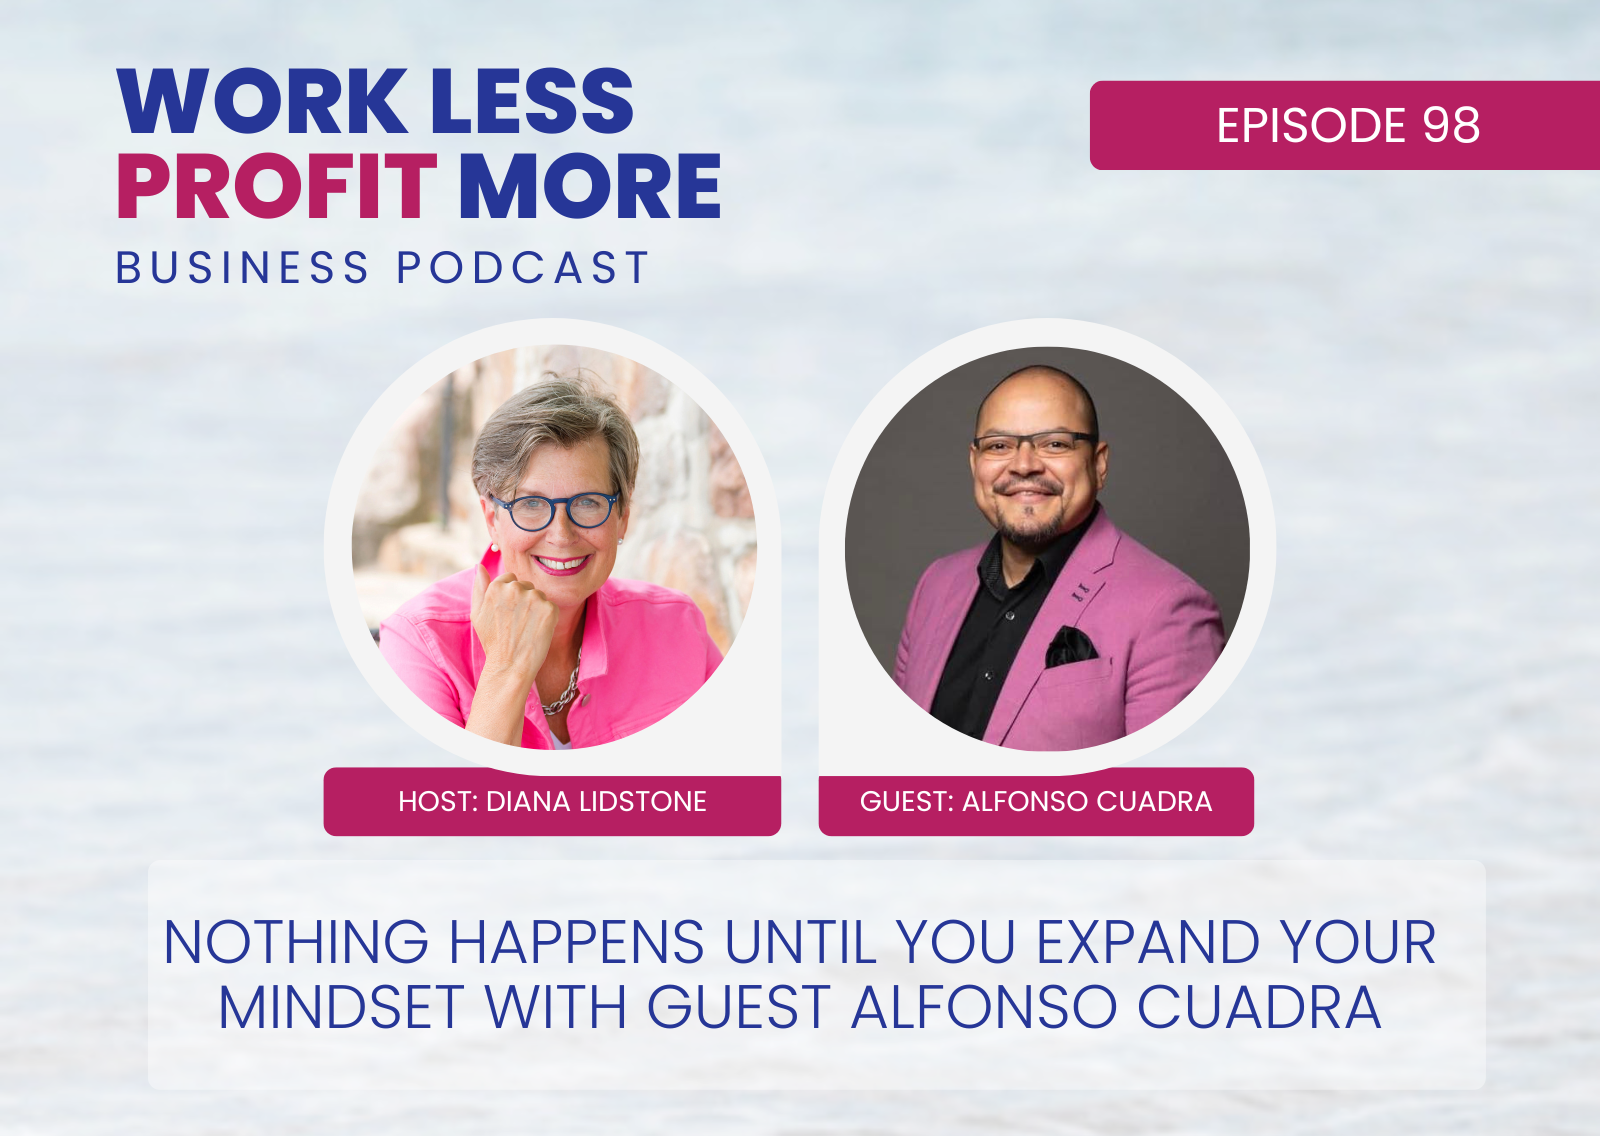 Nothing Happens Until You Expand Your Mindset with Guest Alfonso Cuadra